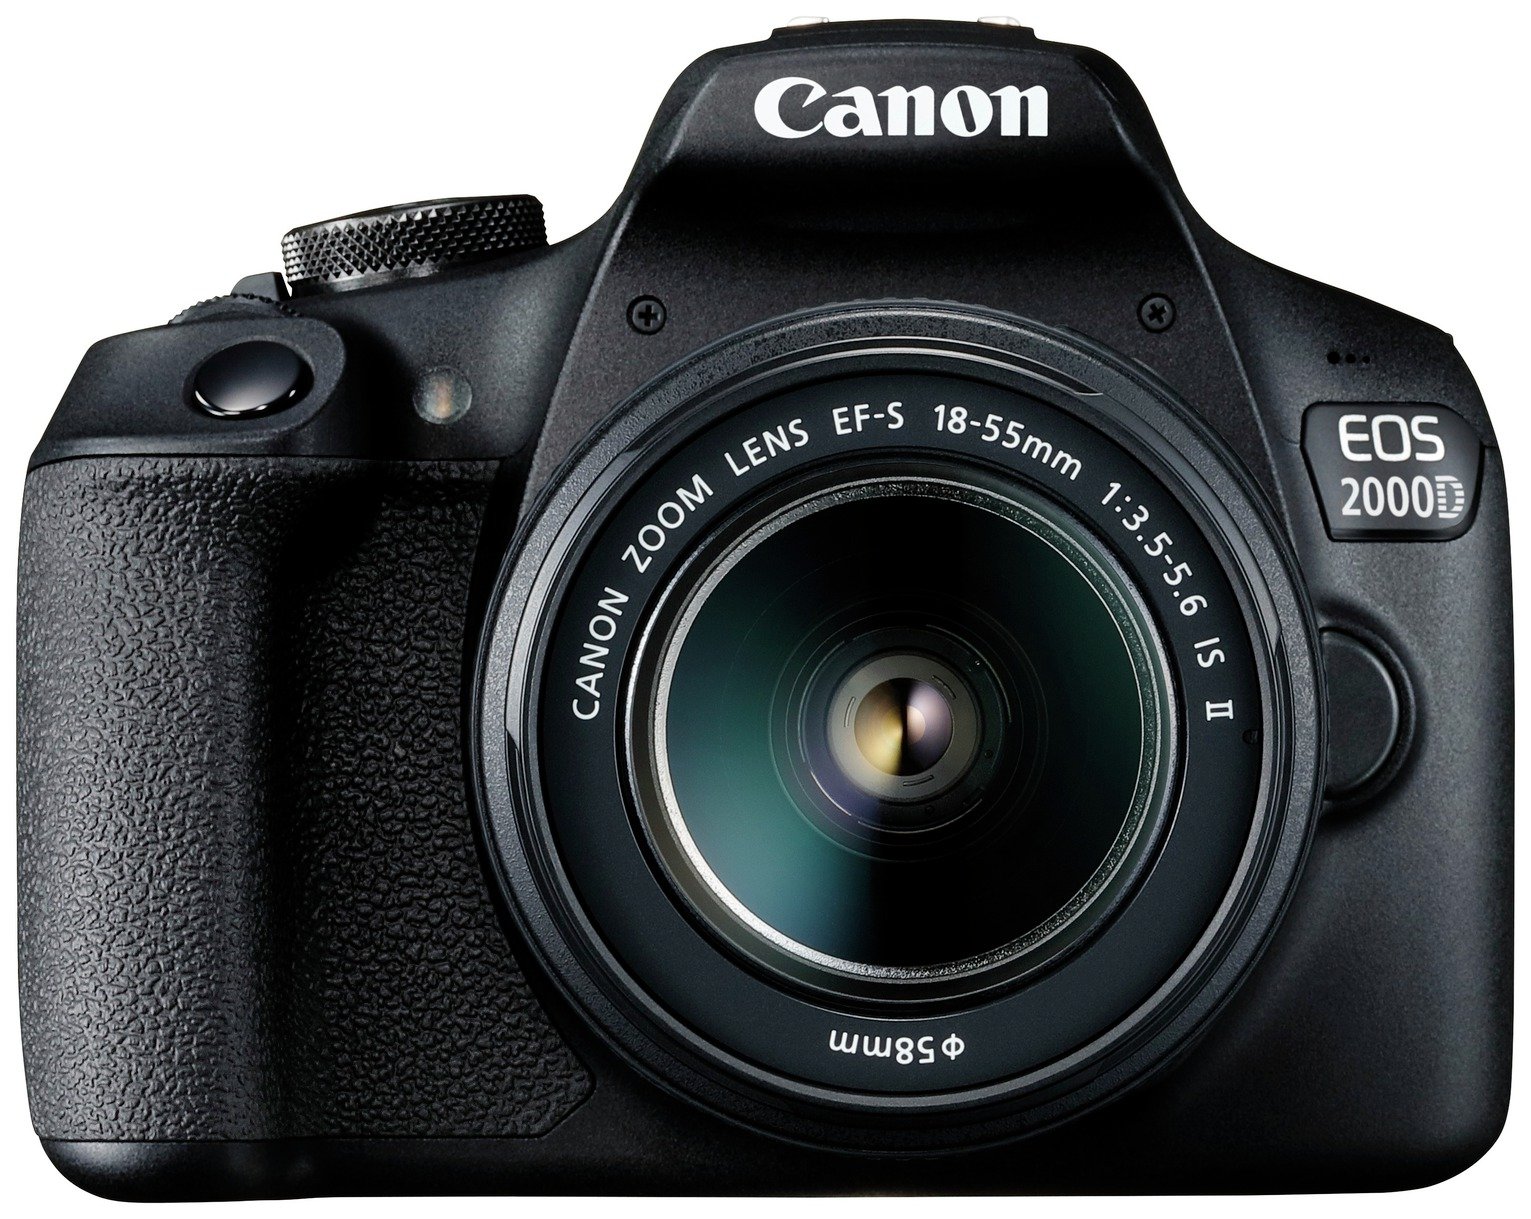 Canon EOS 2000D DSLR Camera with 18-55mm IS Lens